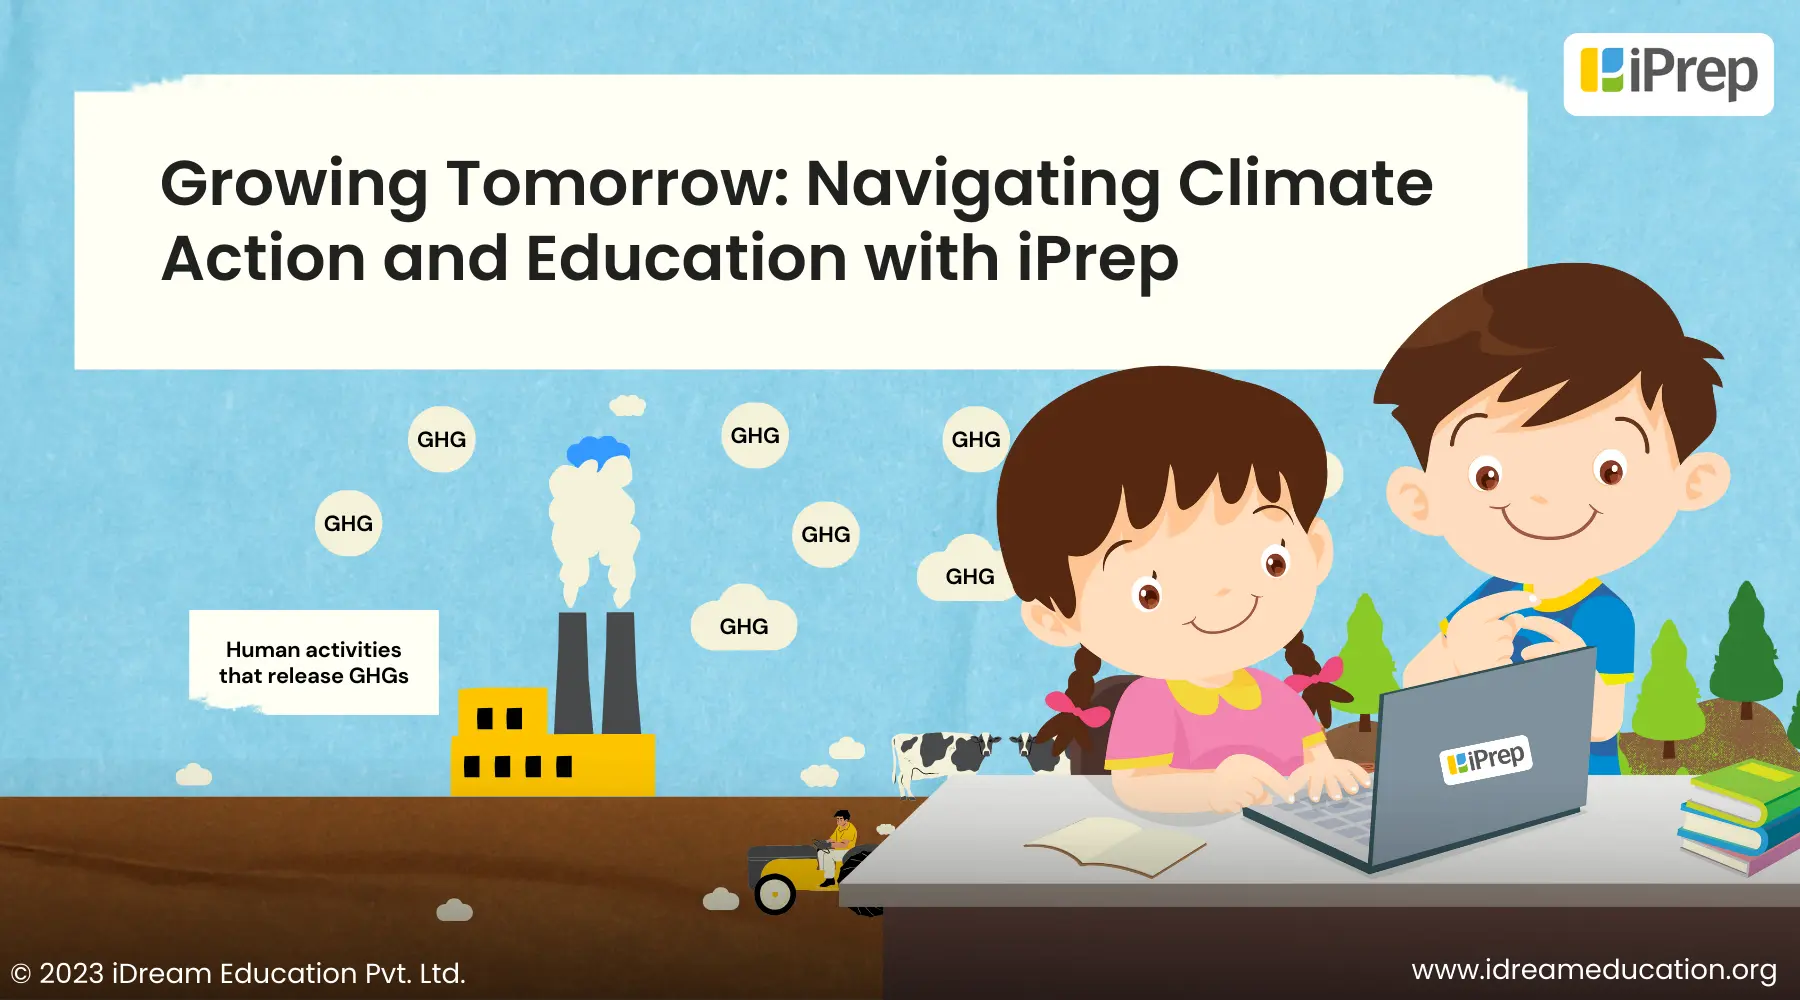 A graphical representation of two students studying using the iPrep platform for navigating climate action and education